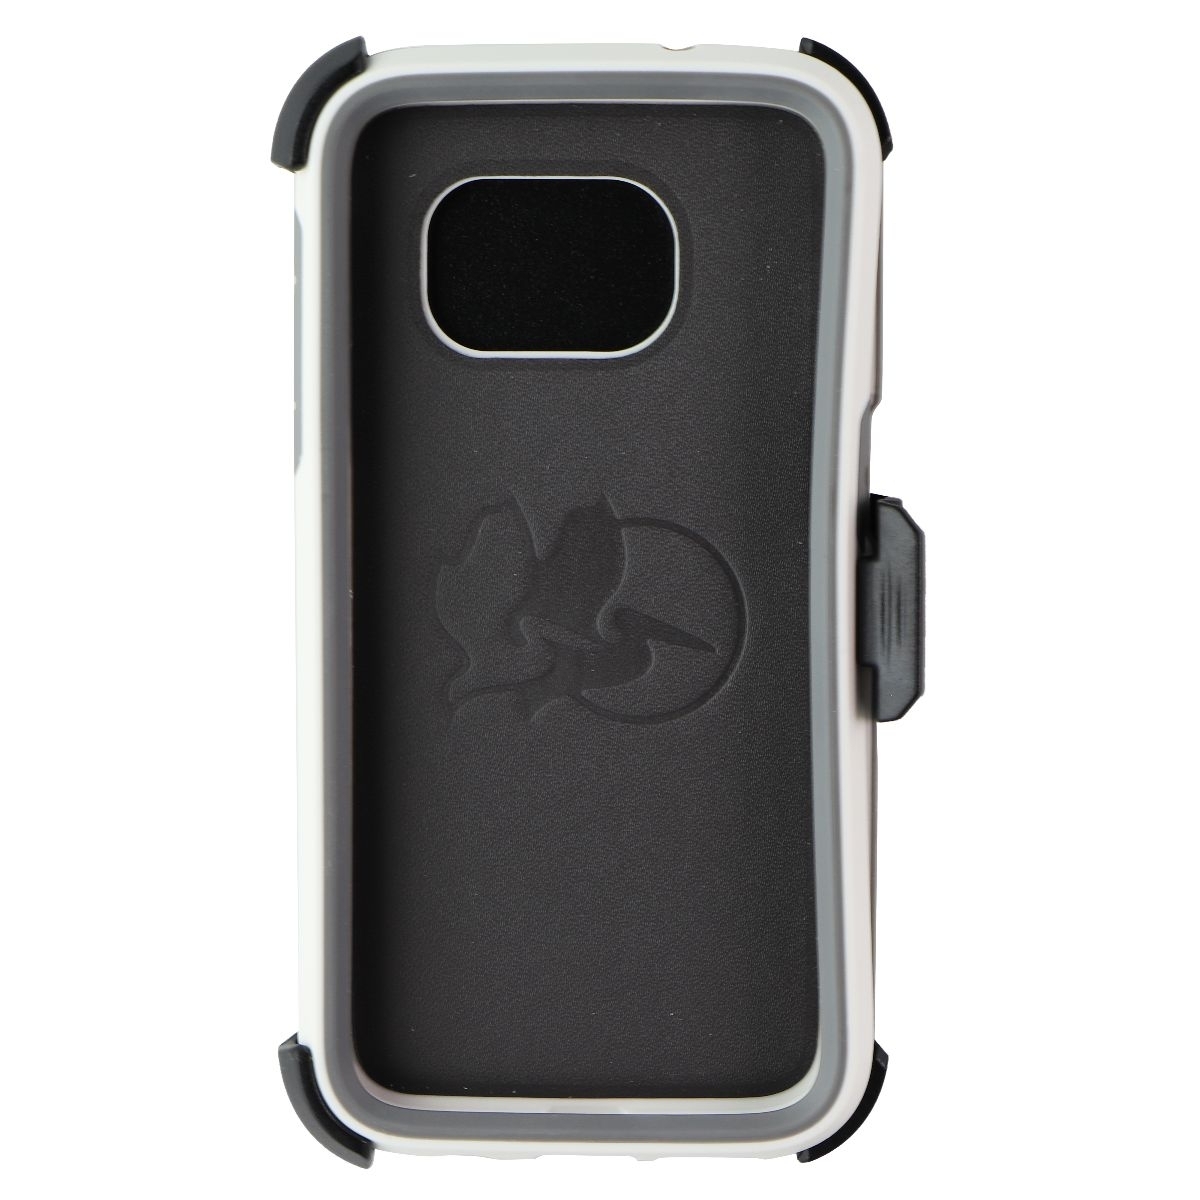 Pelican Voyager Series Hard Case & Holster For Samsung Galaxy S7 - White/Gray (Refurbished)